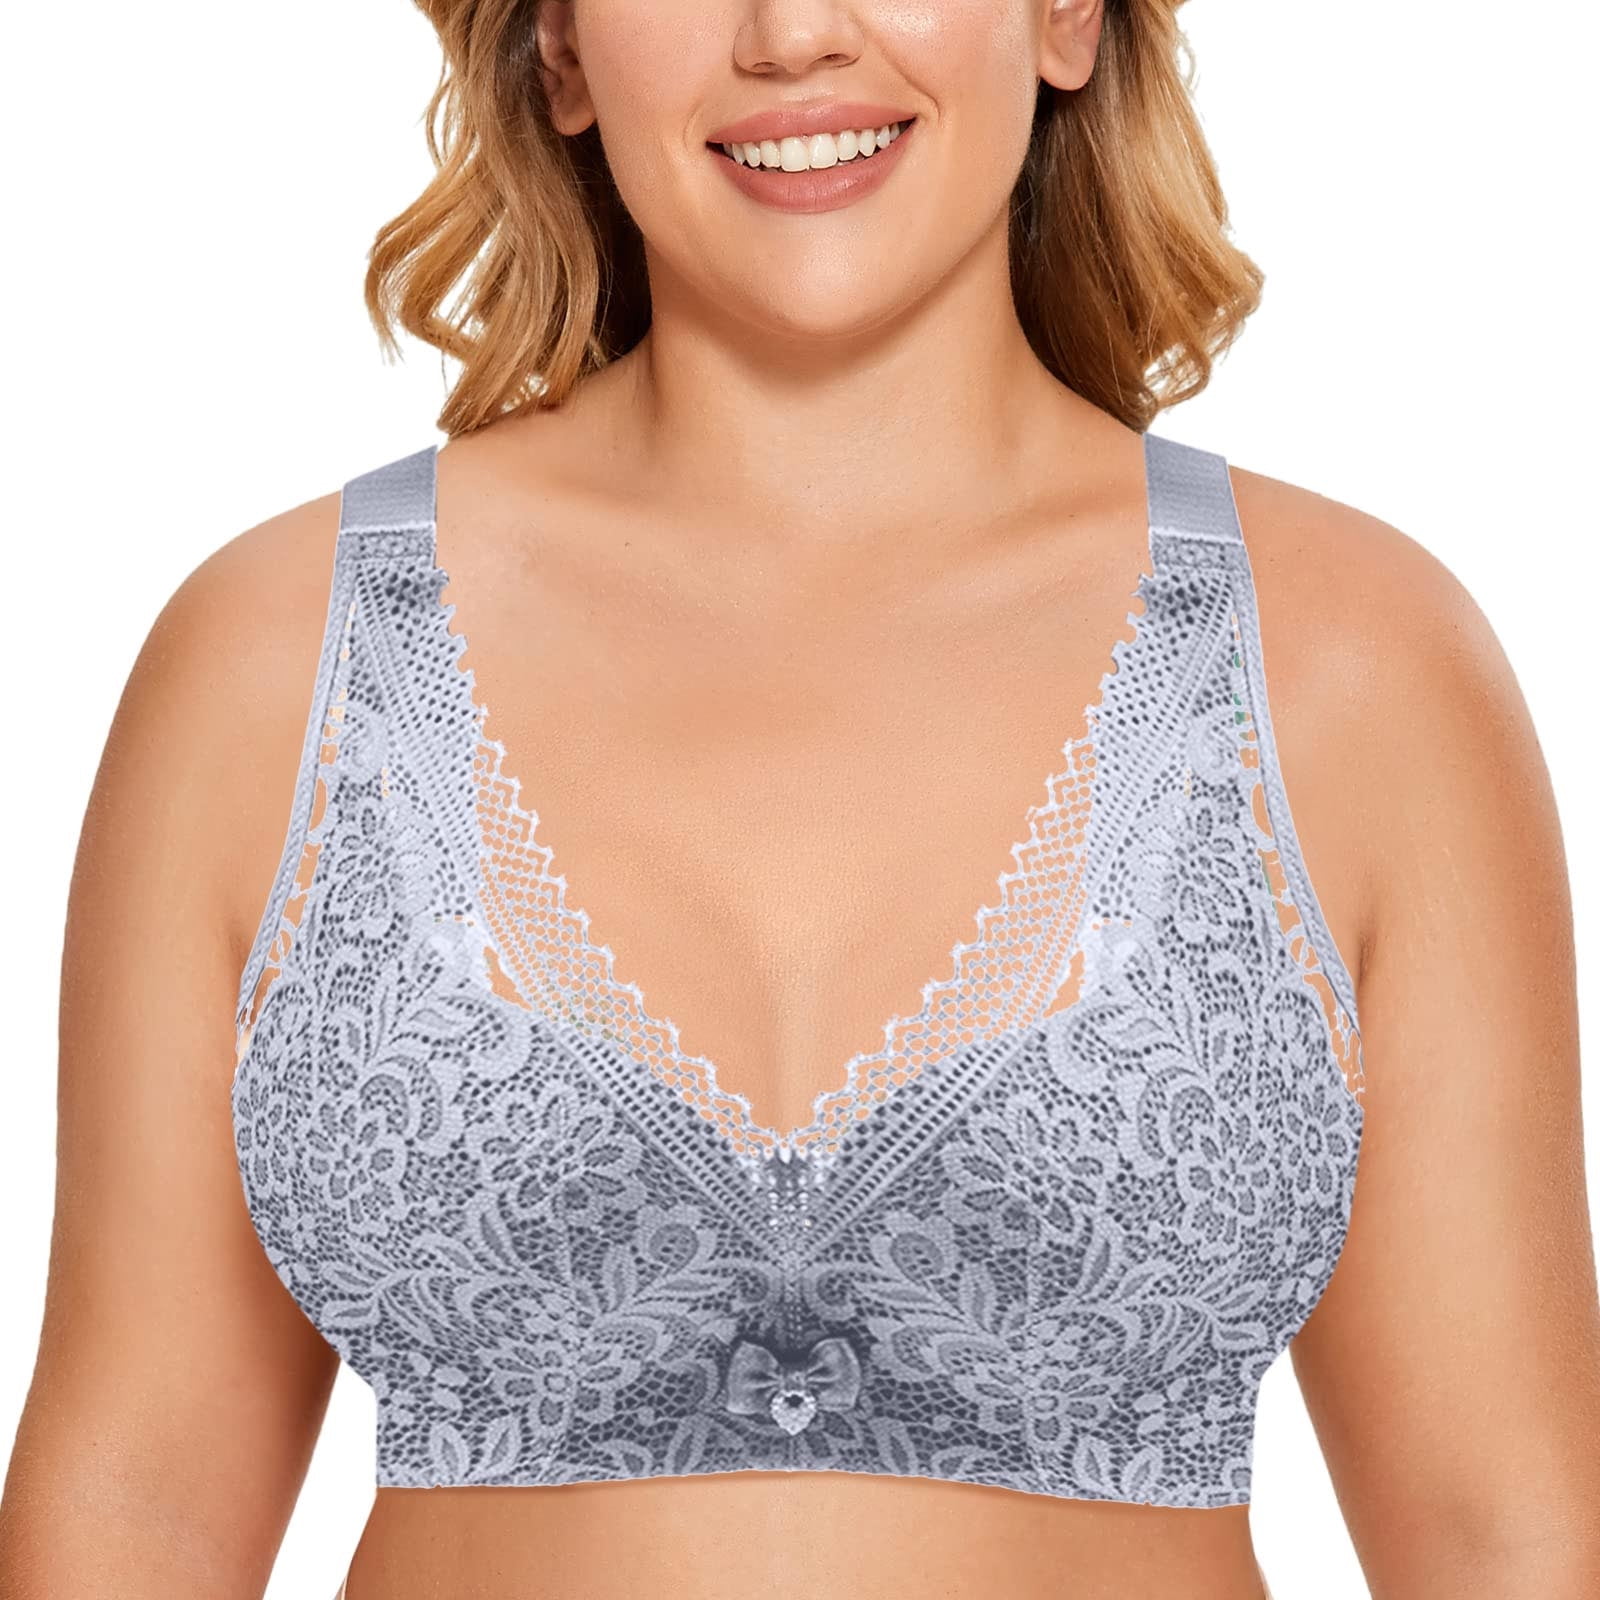 LEEy-World Plus Size Lingerie Beautiful Back Breathable Thin Bras for Women  Seamless Lace Sports Bra for Women Grey,32/70B 